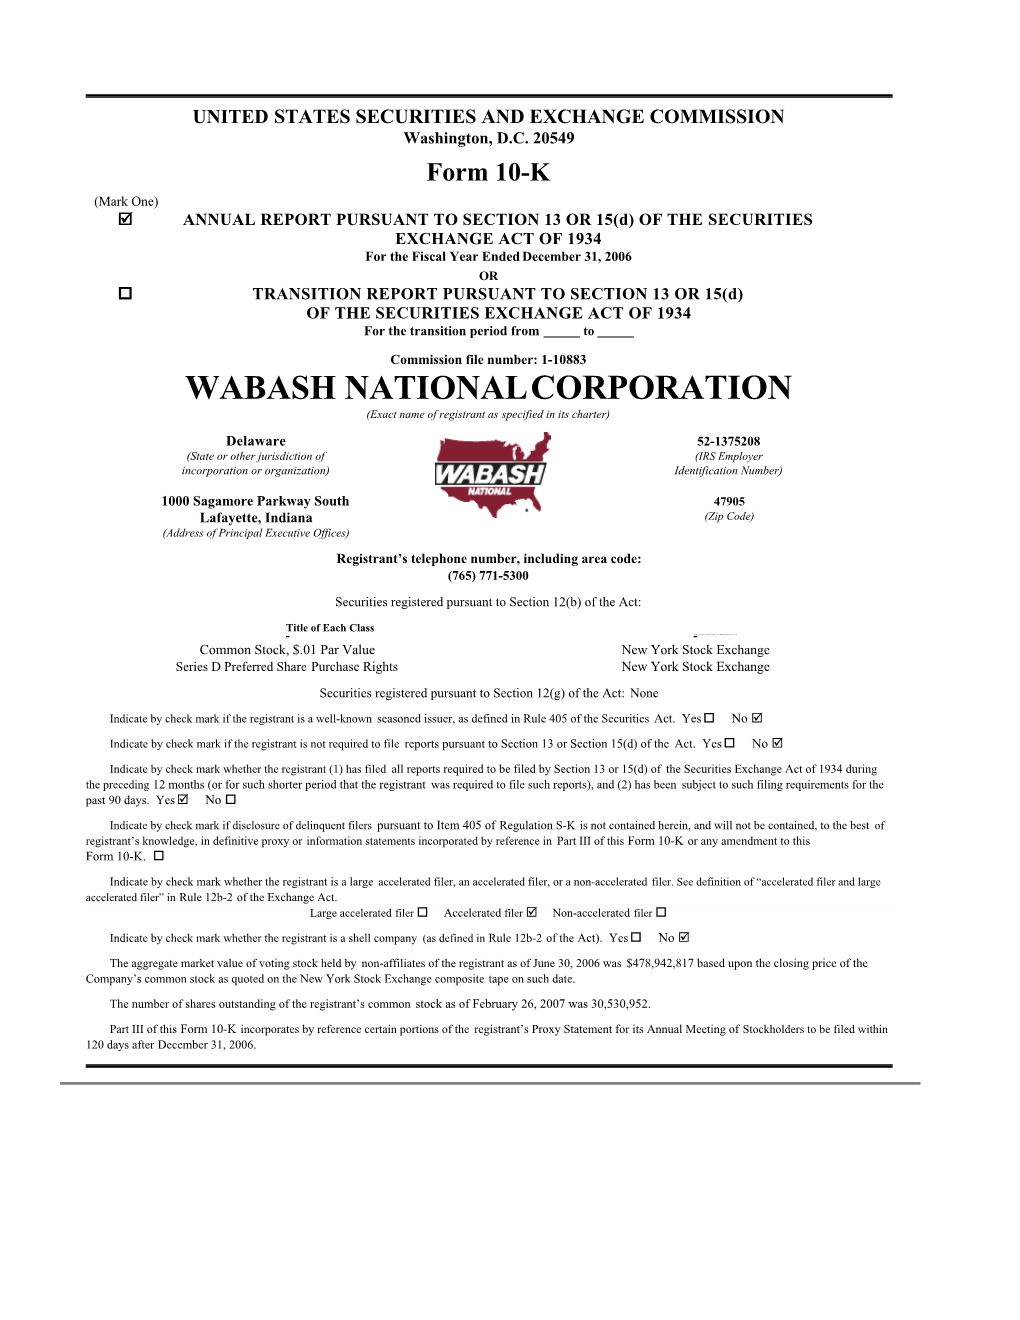 WABASH NATIONAL CORPORATION (Exact Name of Registrant As Specified in Its Charter)